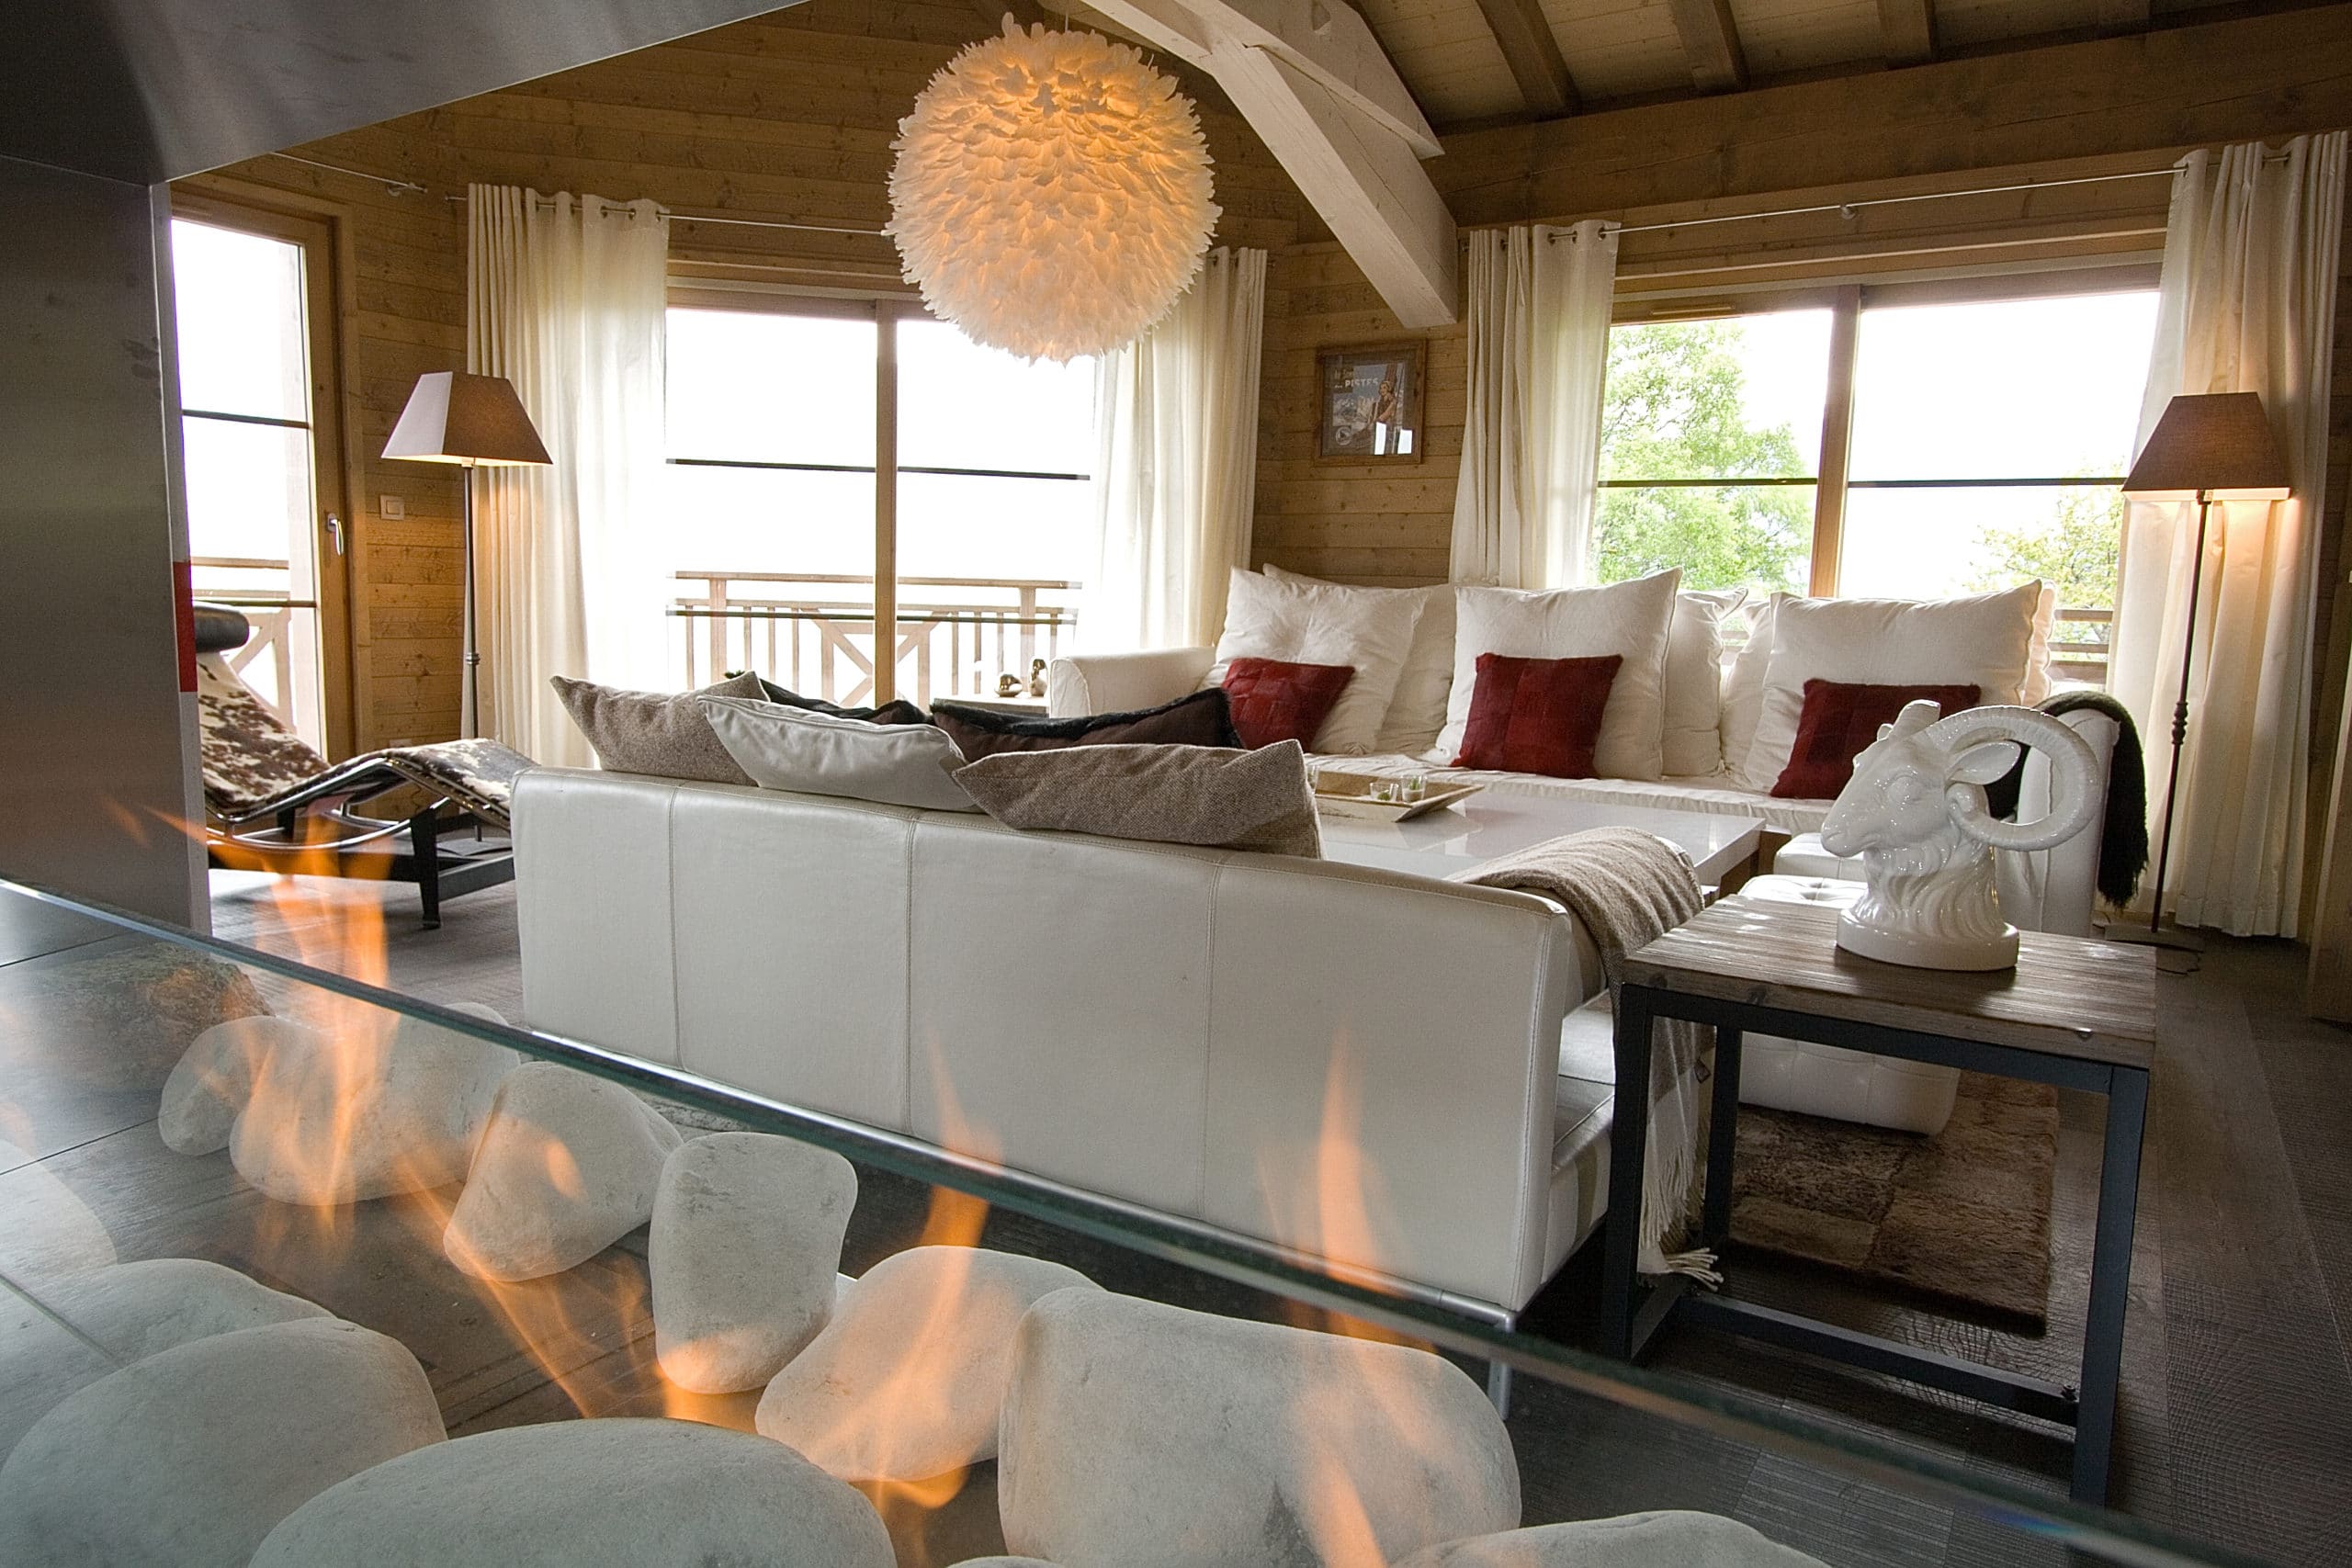 Sitting Room And Fire In Our Luxury Ski Chalet Igloo